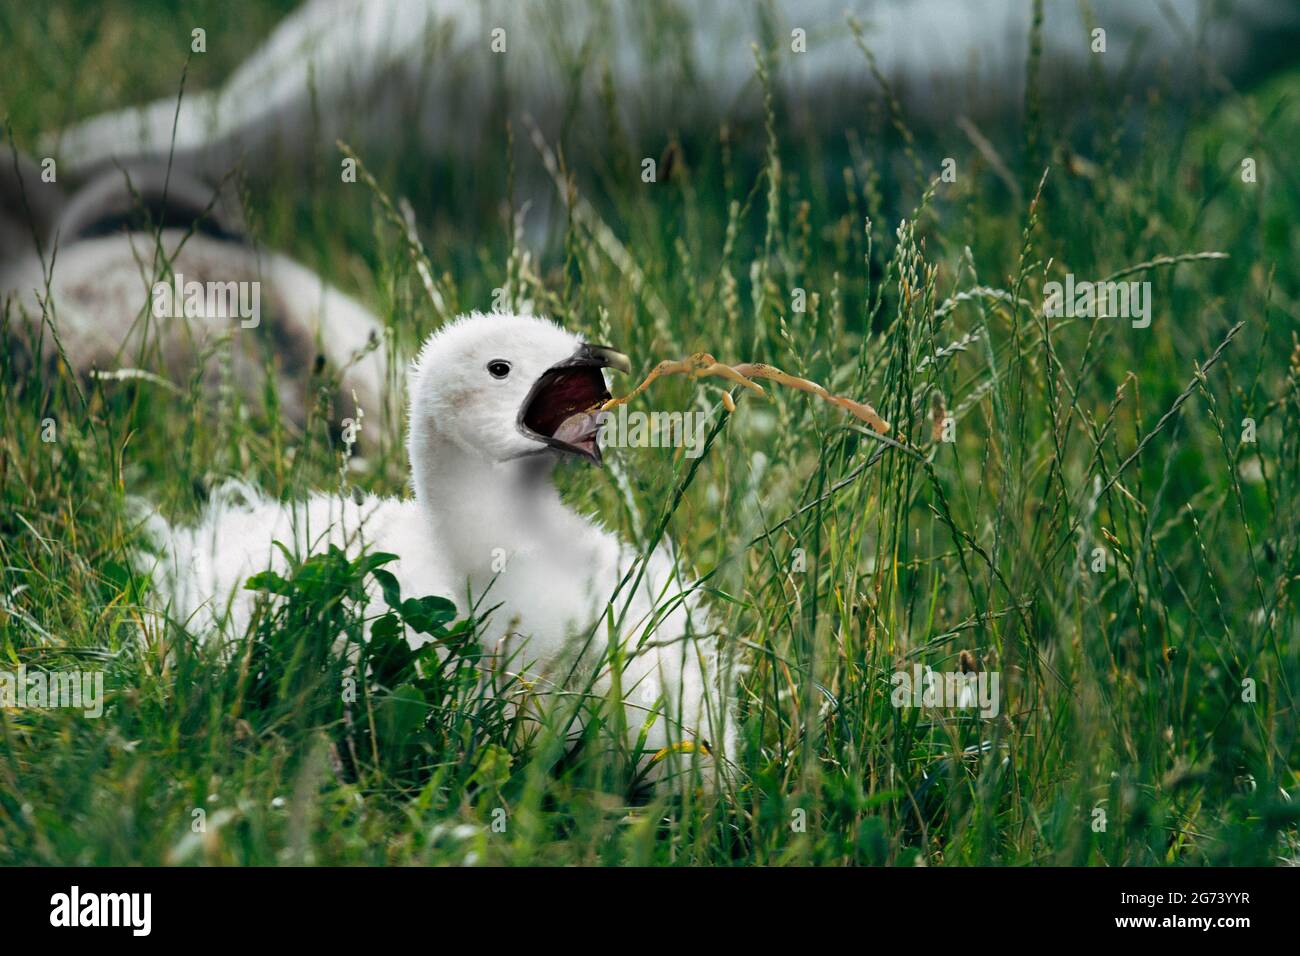 Fulmar chick defensinve vomiting, white chick on groud defensive. Stock Photo